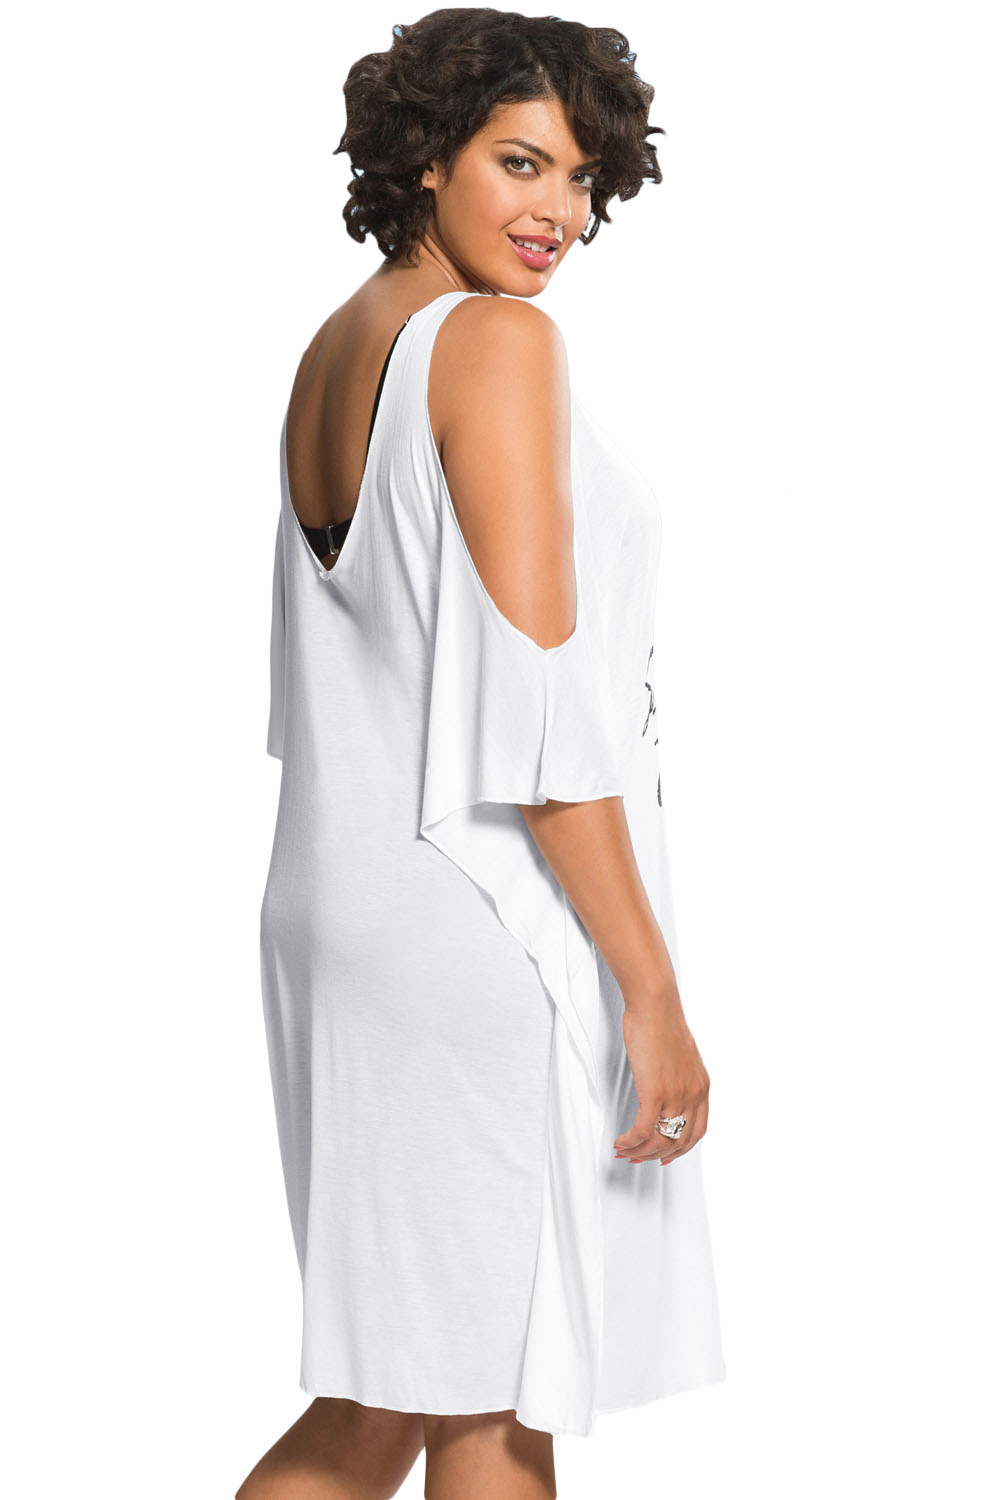 F4576-1 Summer Time White Cold Shoulder Casual Shirt Dress